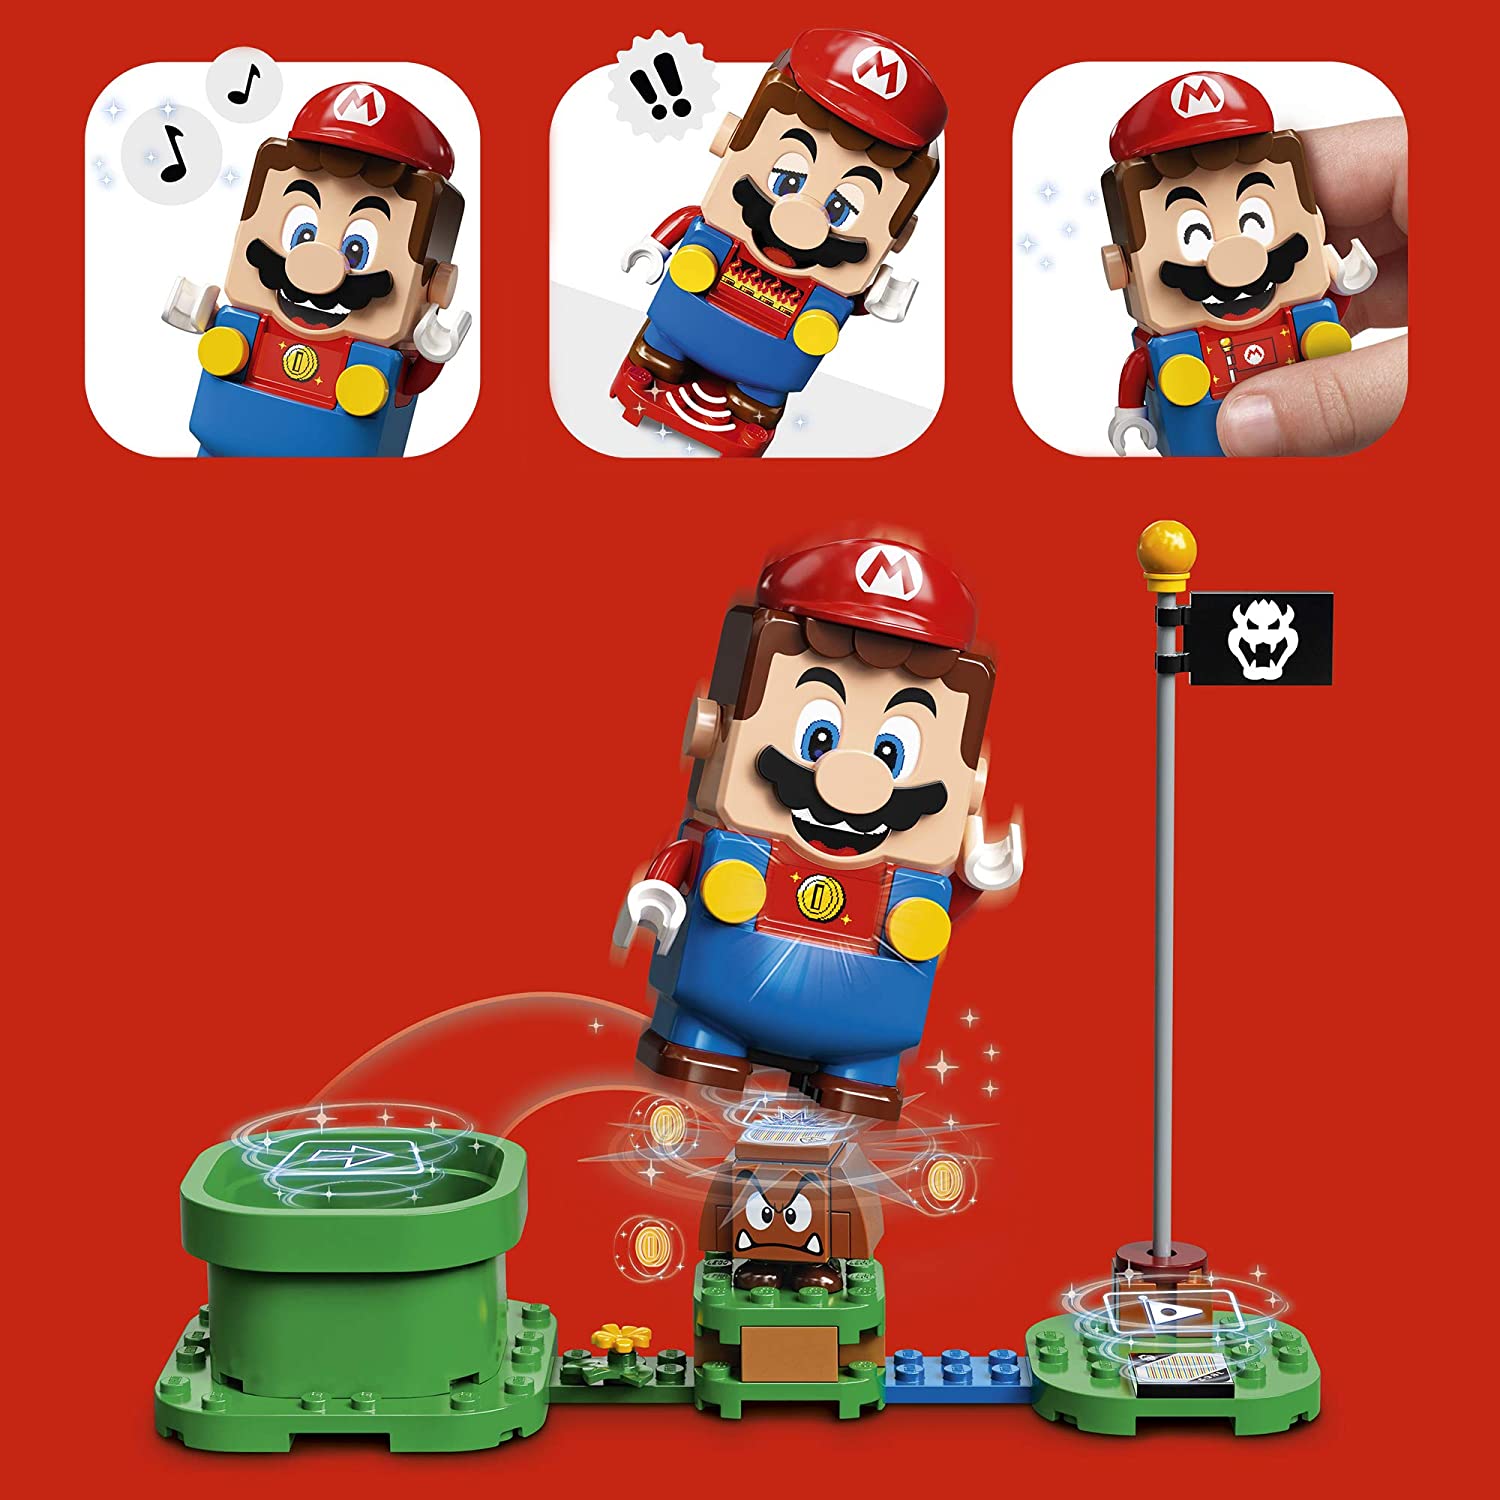 LEGO's First Interactive Super Mario Set Launches On 1 August, Pre